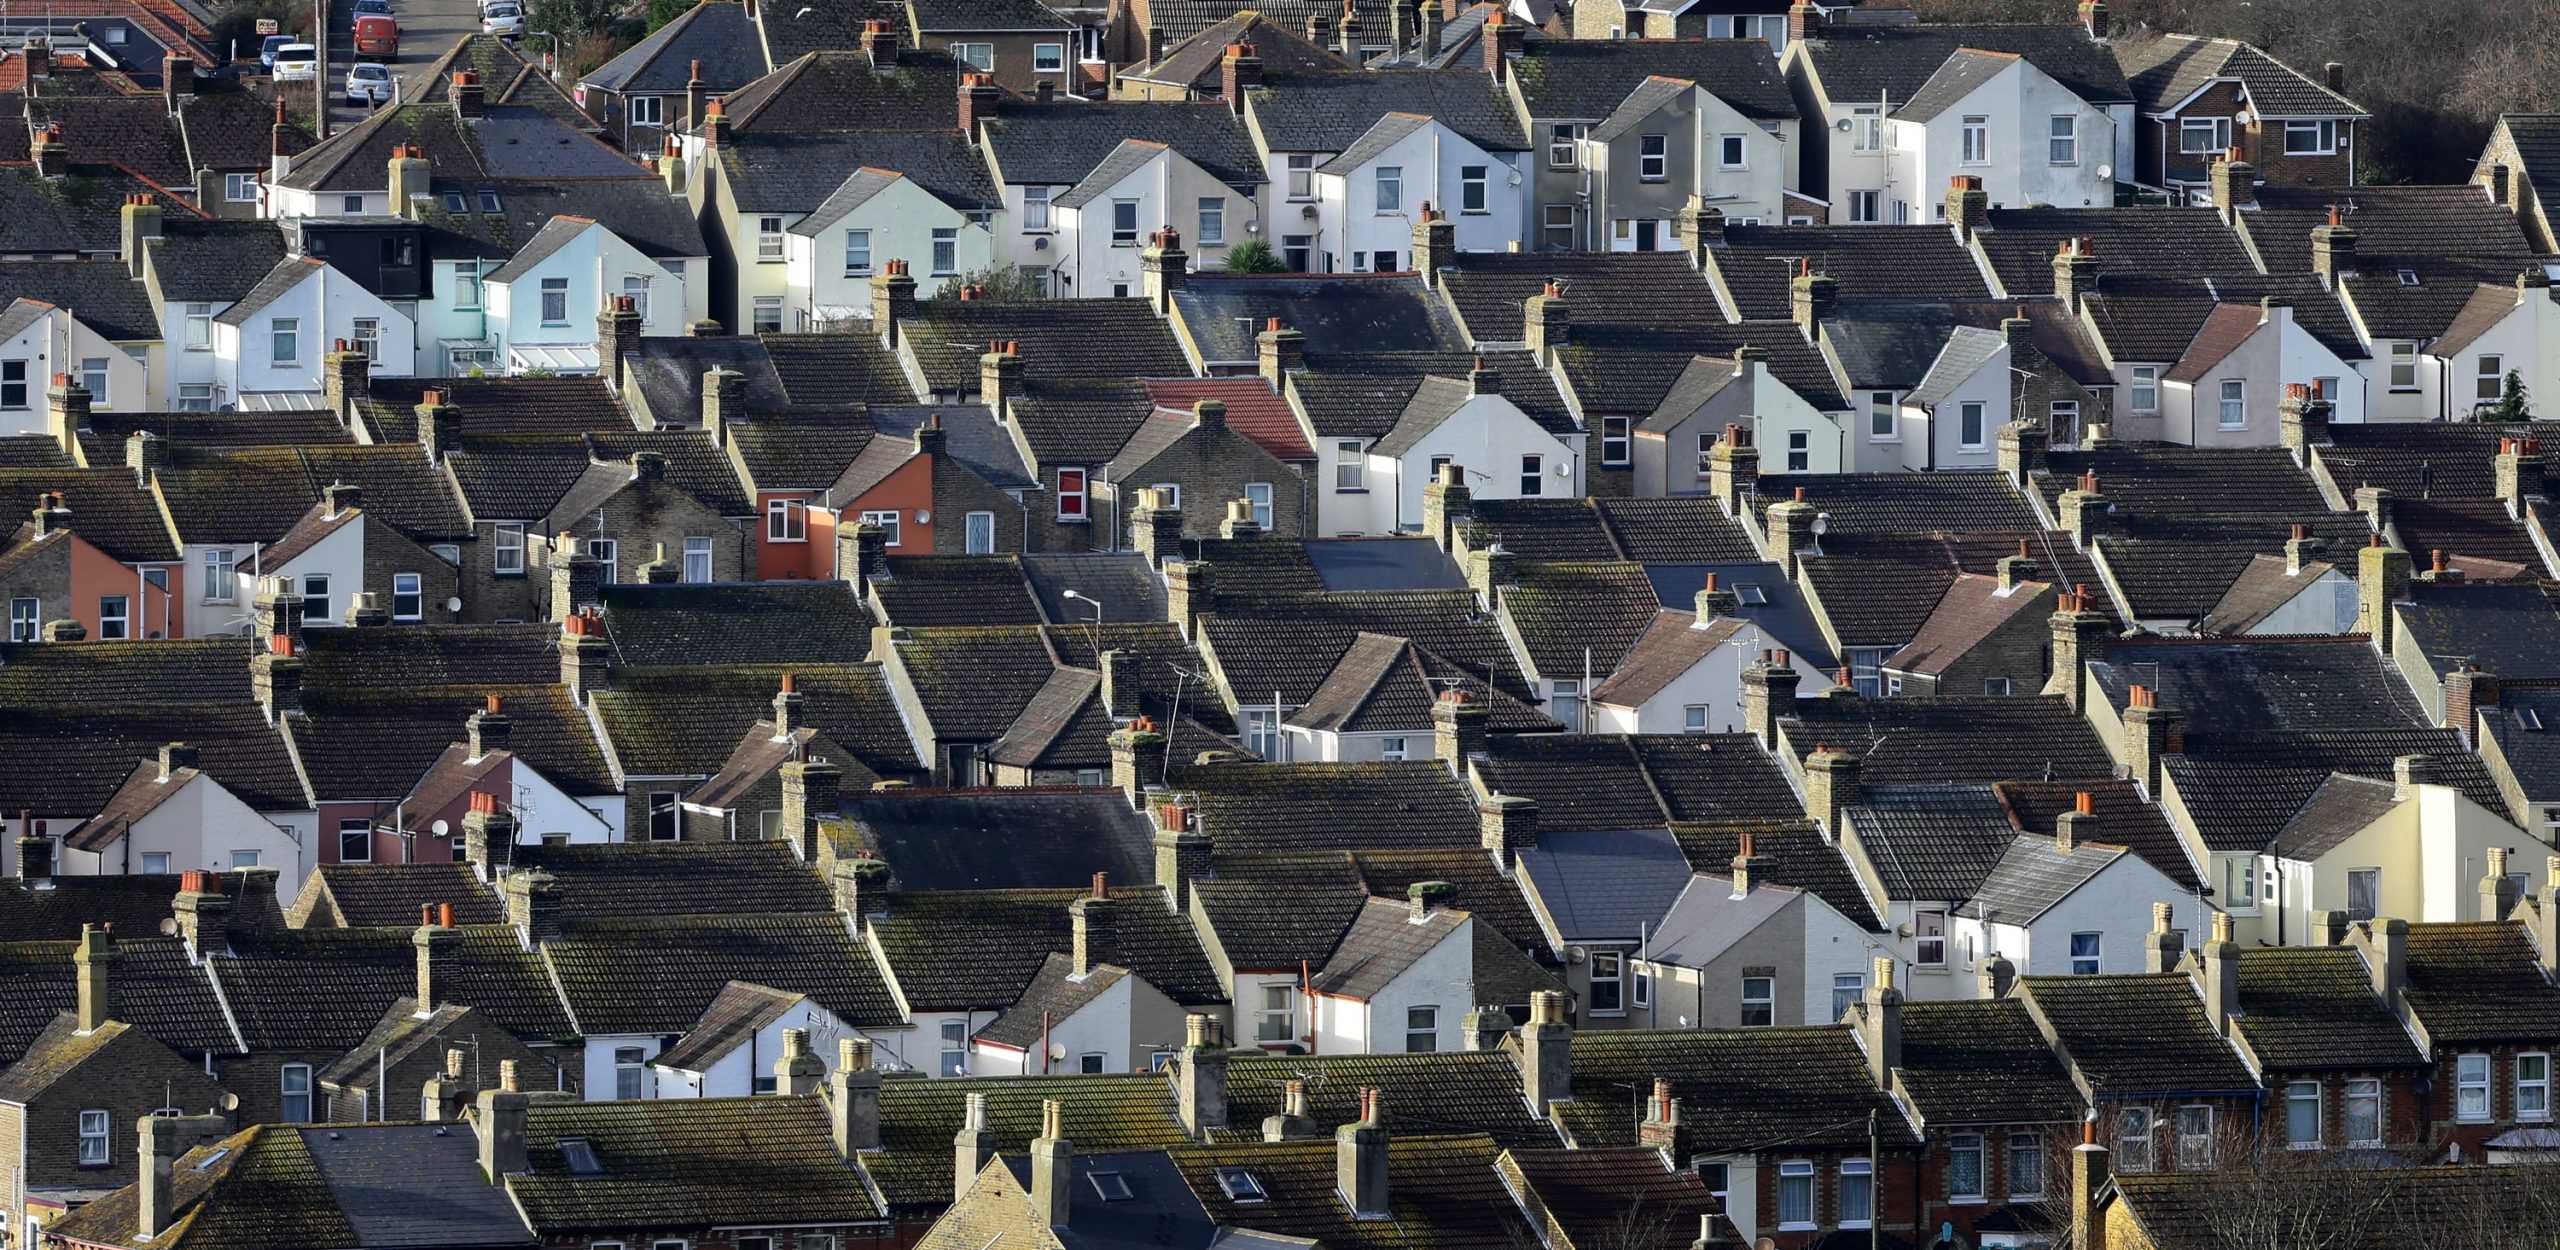 Number of empty homes in UK equivalent to a city the size of Manchester